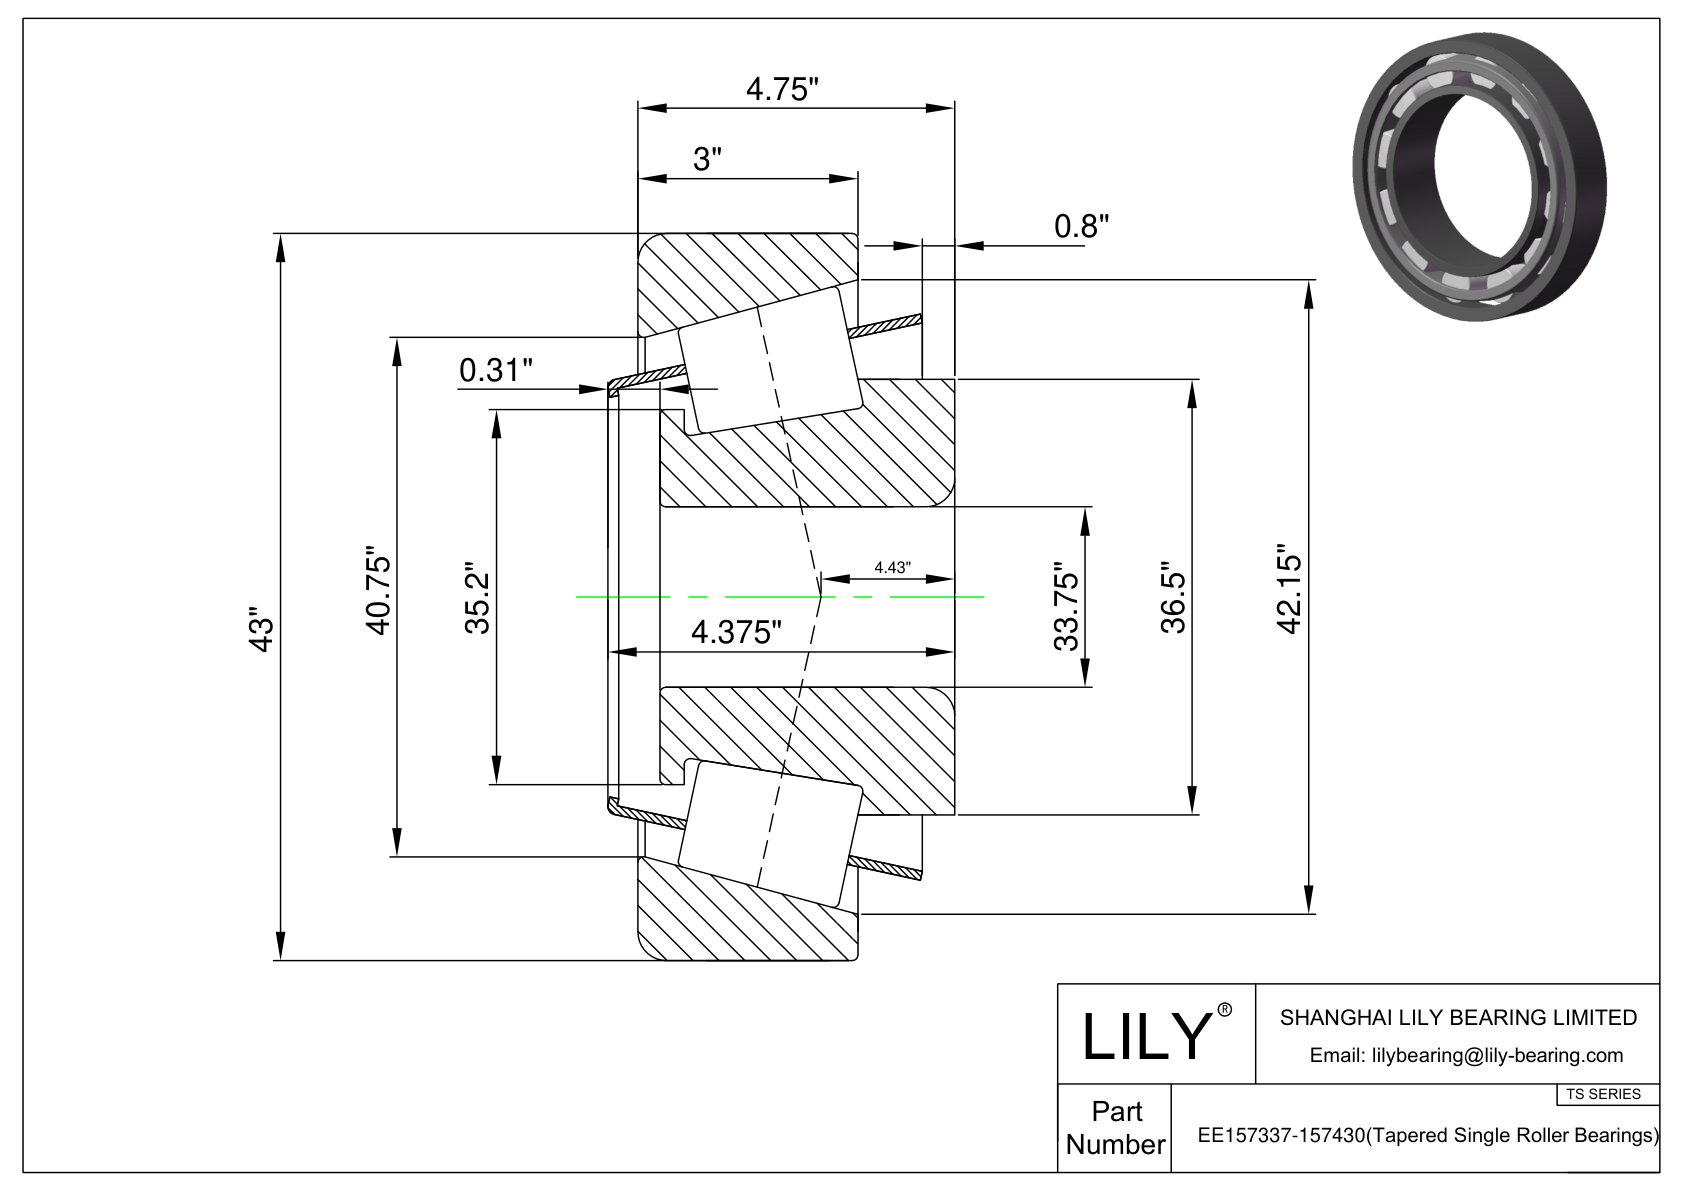 EE157337-157430 TS (Tapered Single Roller Bearings) (Imperial) cad drawing